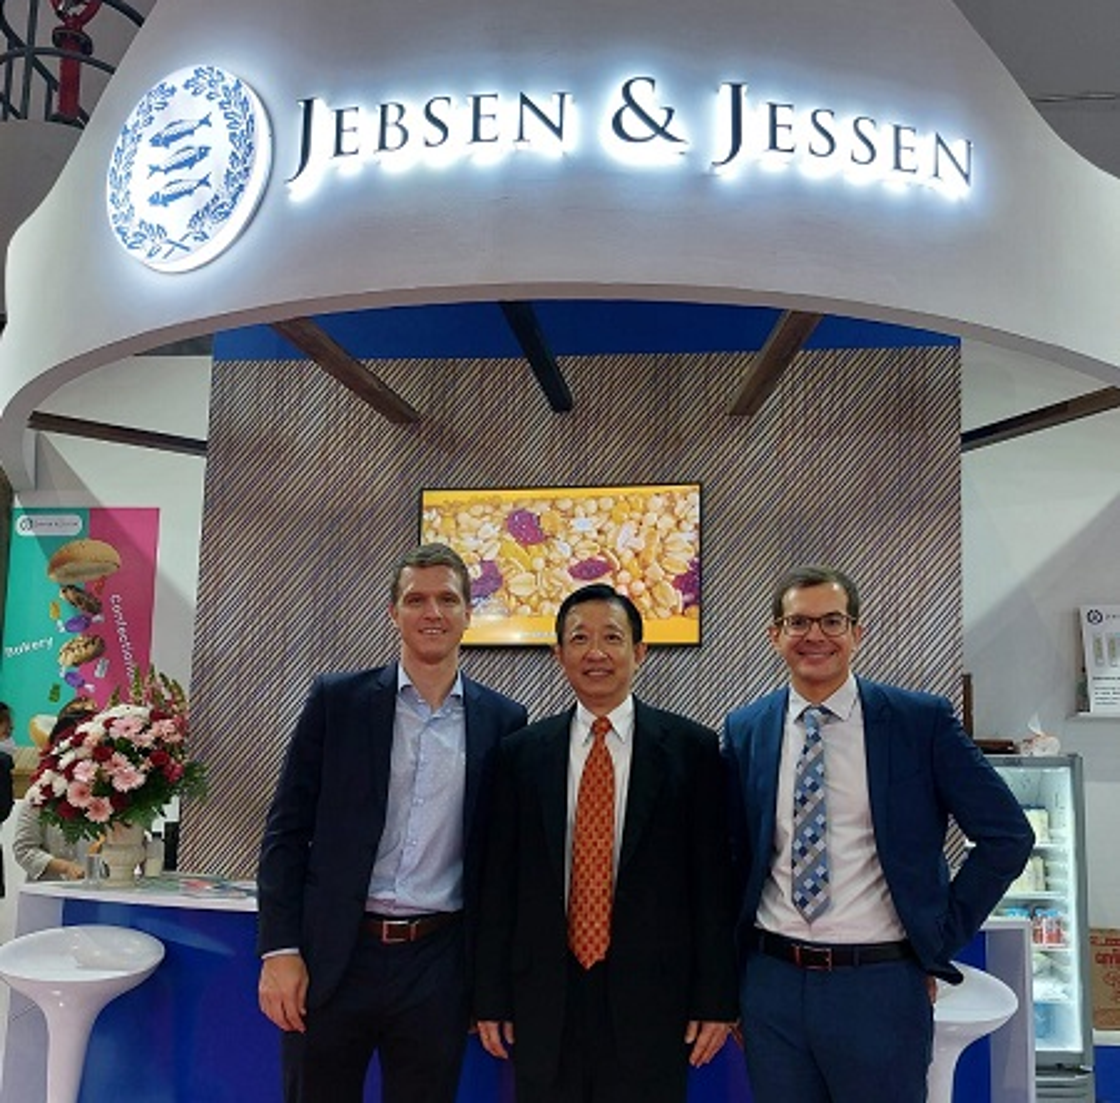 Jebsen & Jessen Ingredients Indonesia presented innovative solutions at ASEAN’s largest food exhibition